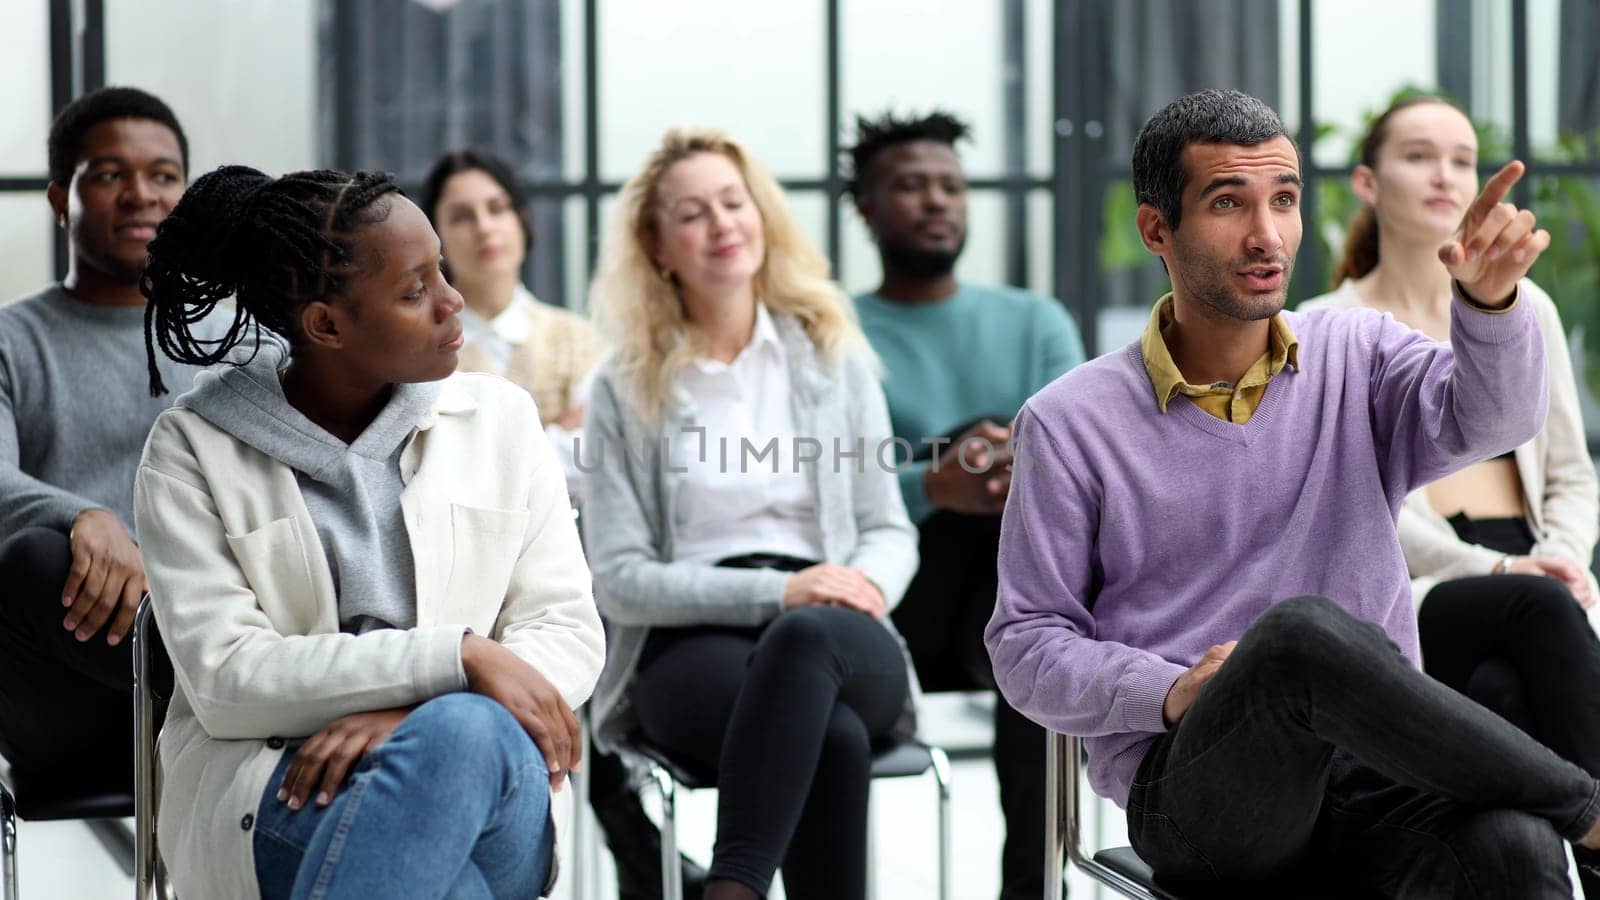 Close-up of people chatting, sitting in a circle and gesturing in a conference room